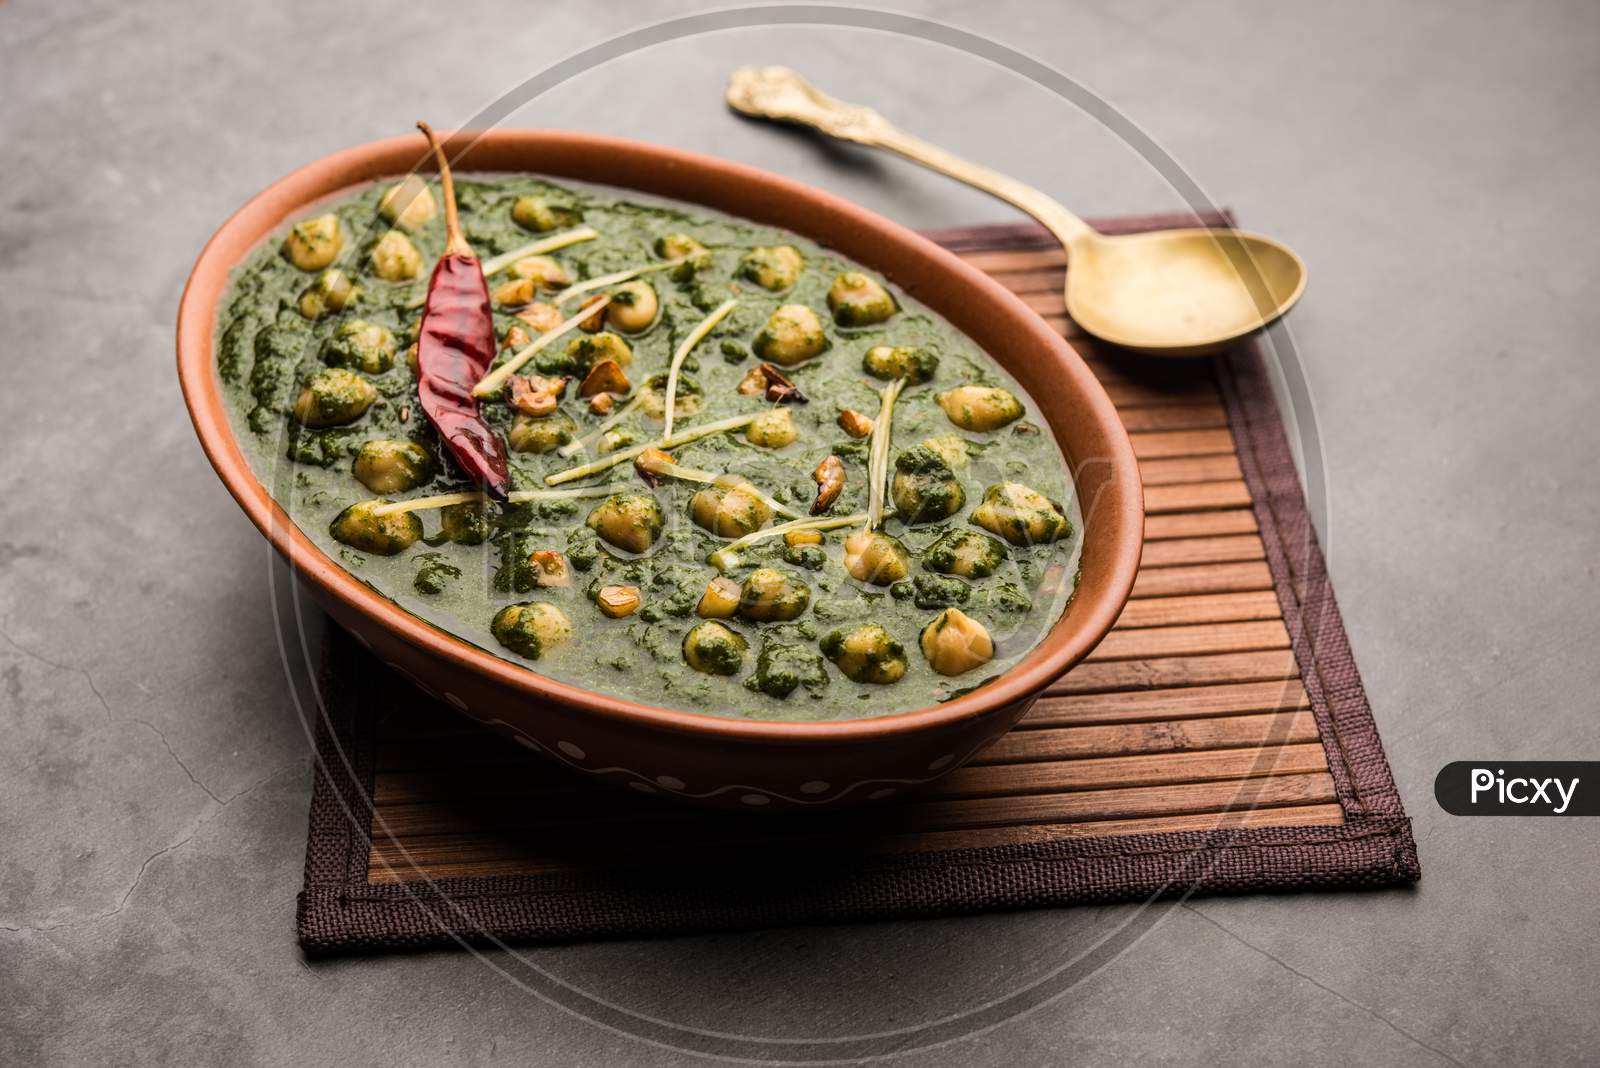 Chana Palak Masala Or Chickpea Spinach Curry With Paratha And White Rice, Indian Food